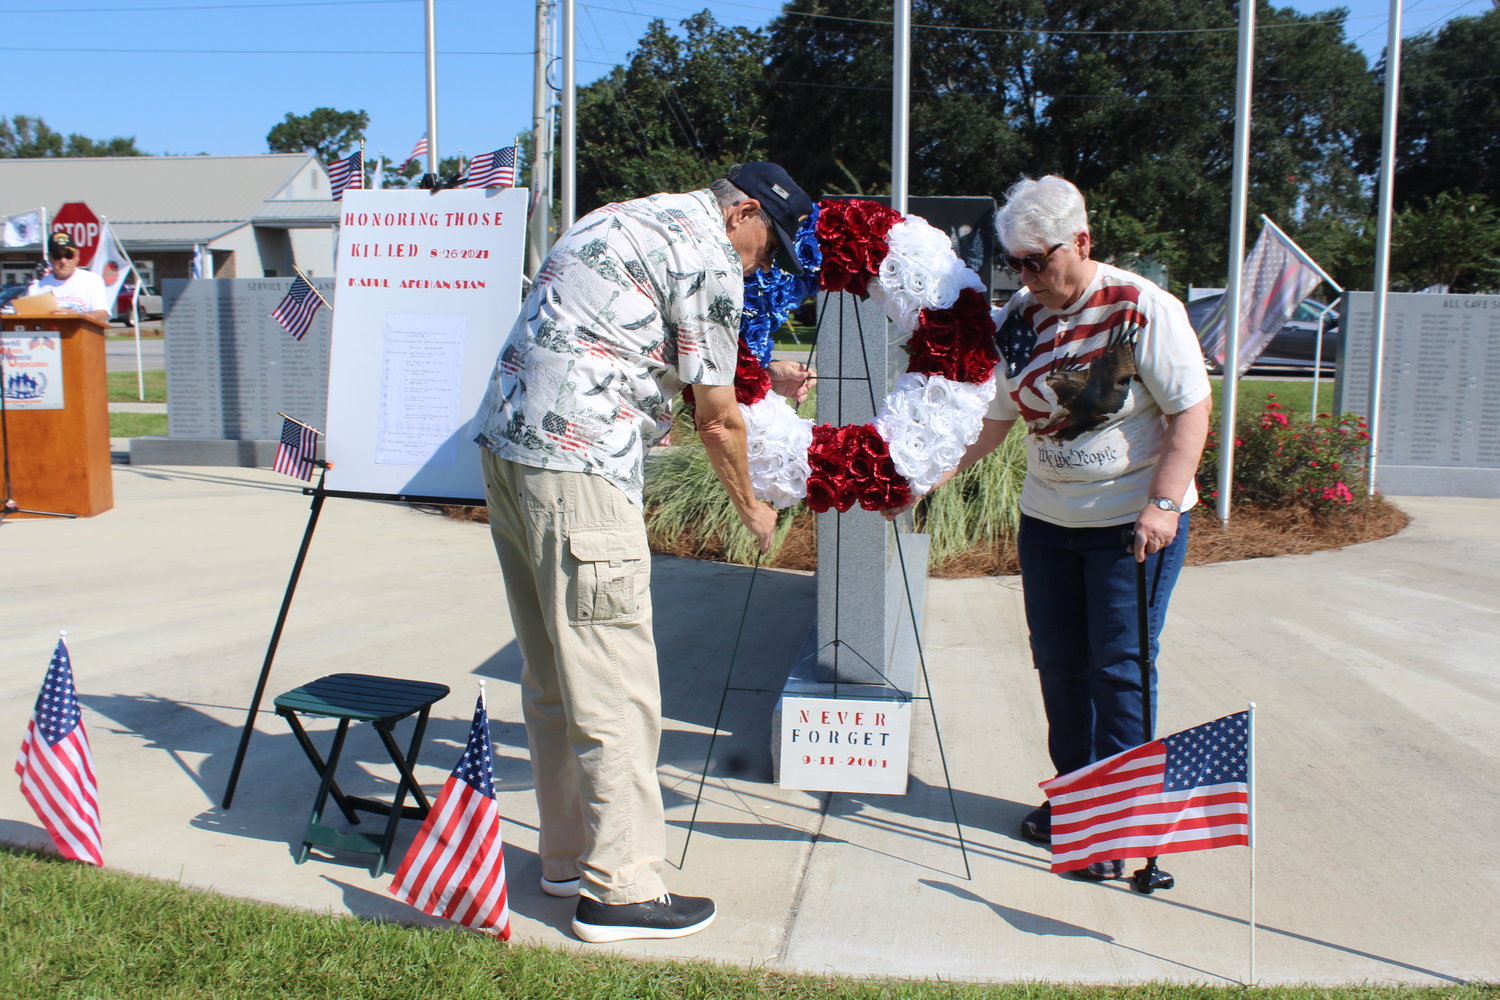 Pat and Pat Burke, members of the Silverhill Veterans Memorial Organization, place a wreath honoring and remembering the 13 soldiers who were killed on Thursday, Aug. 26 in Kabul, Afghanistan.